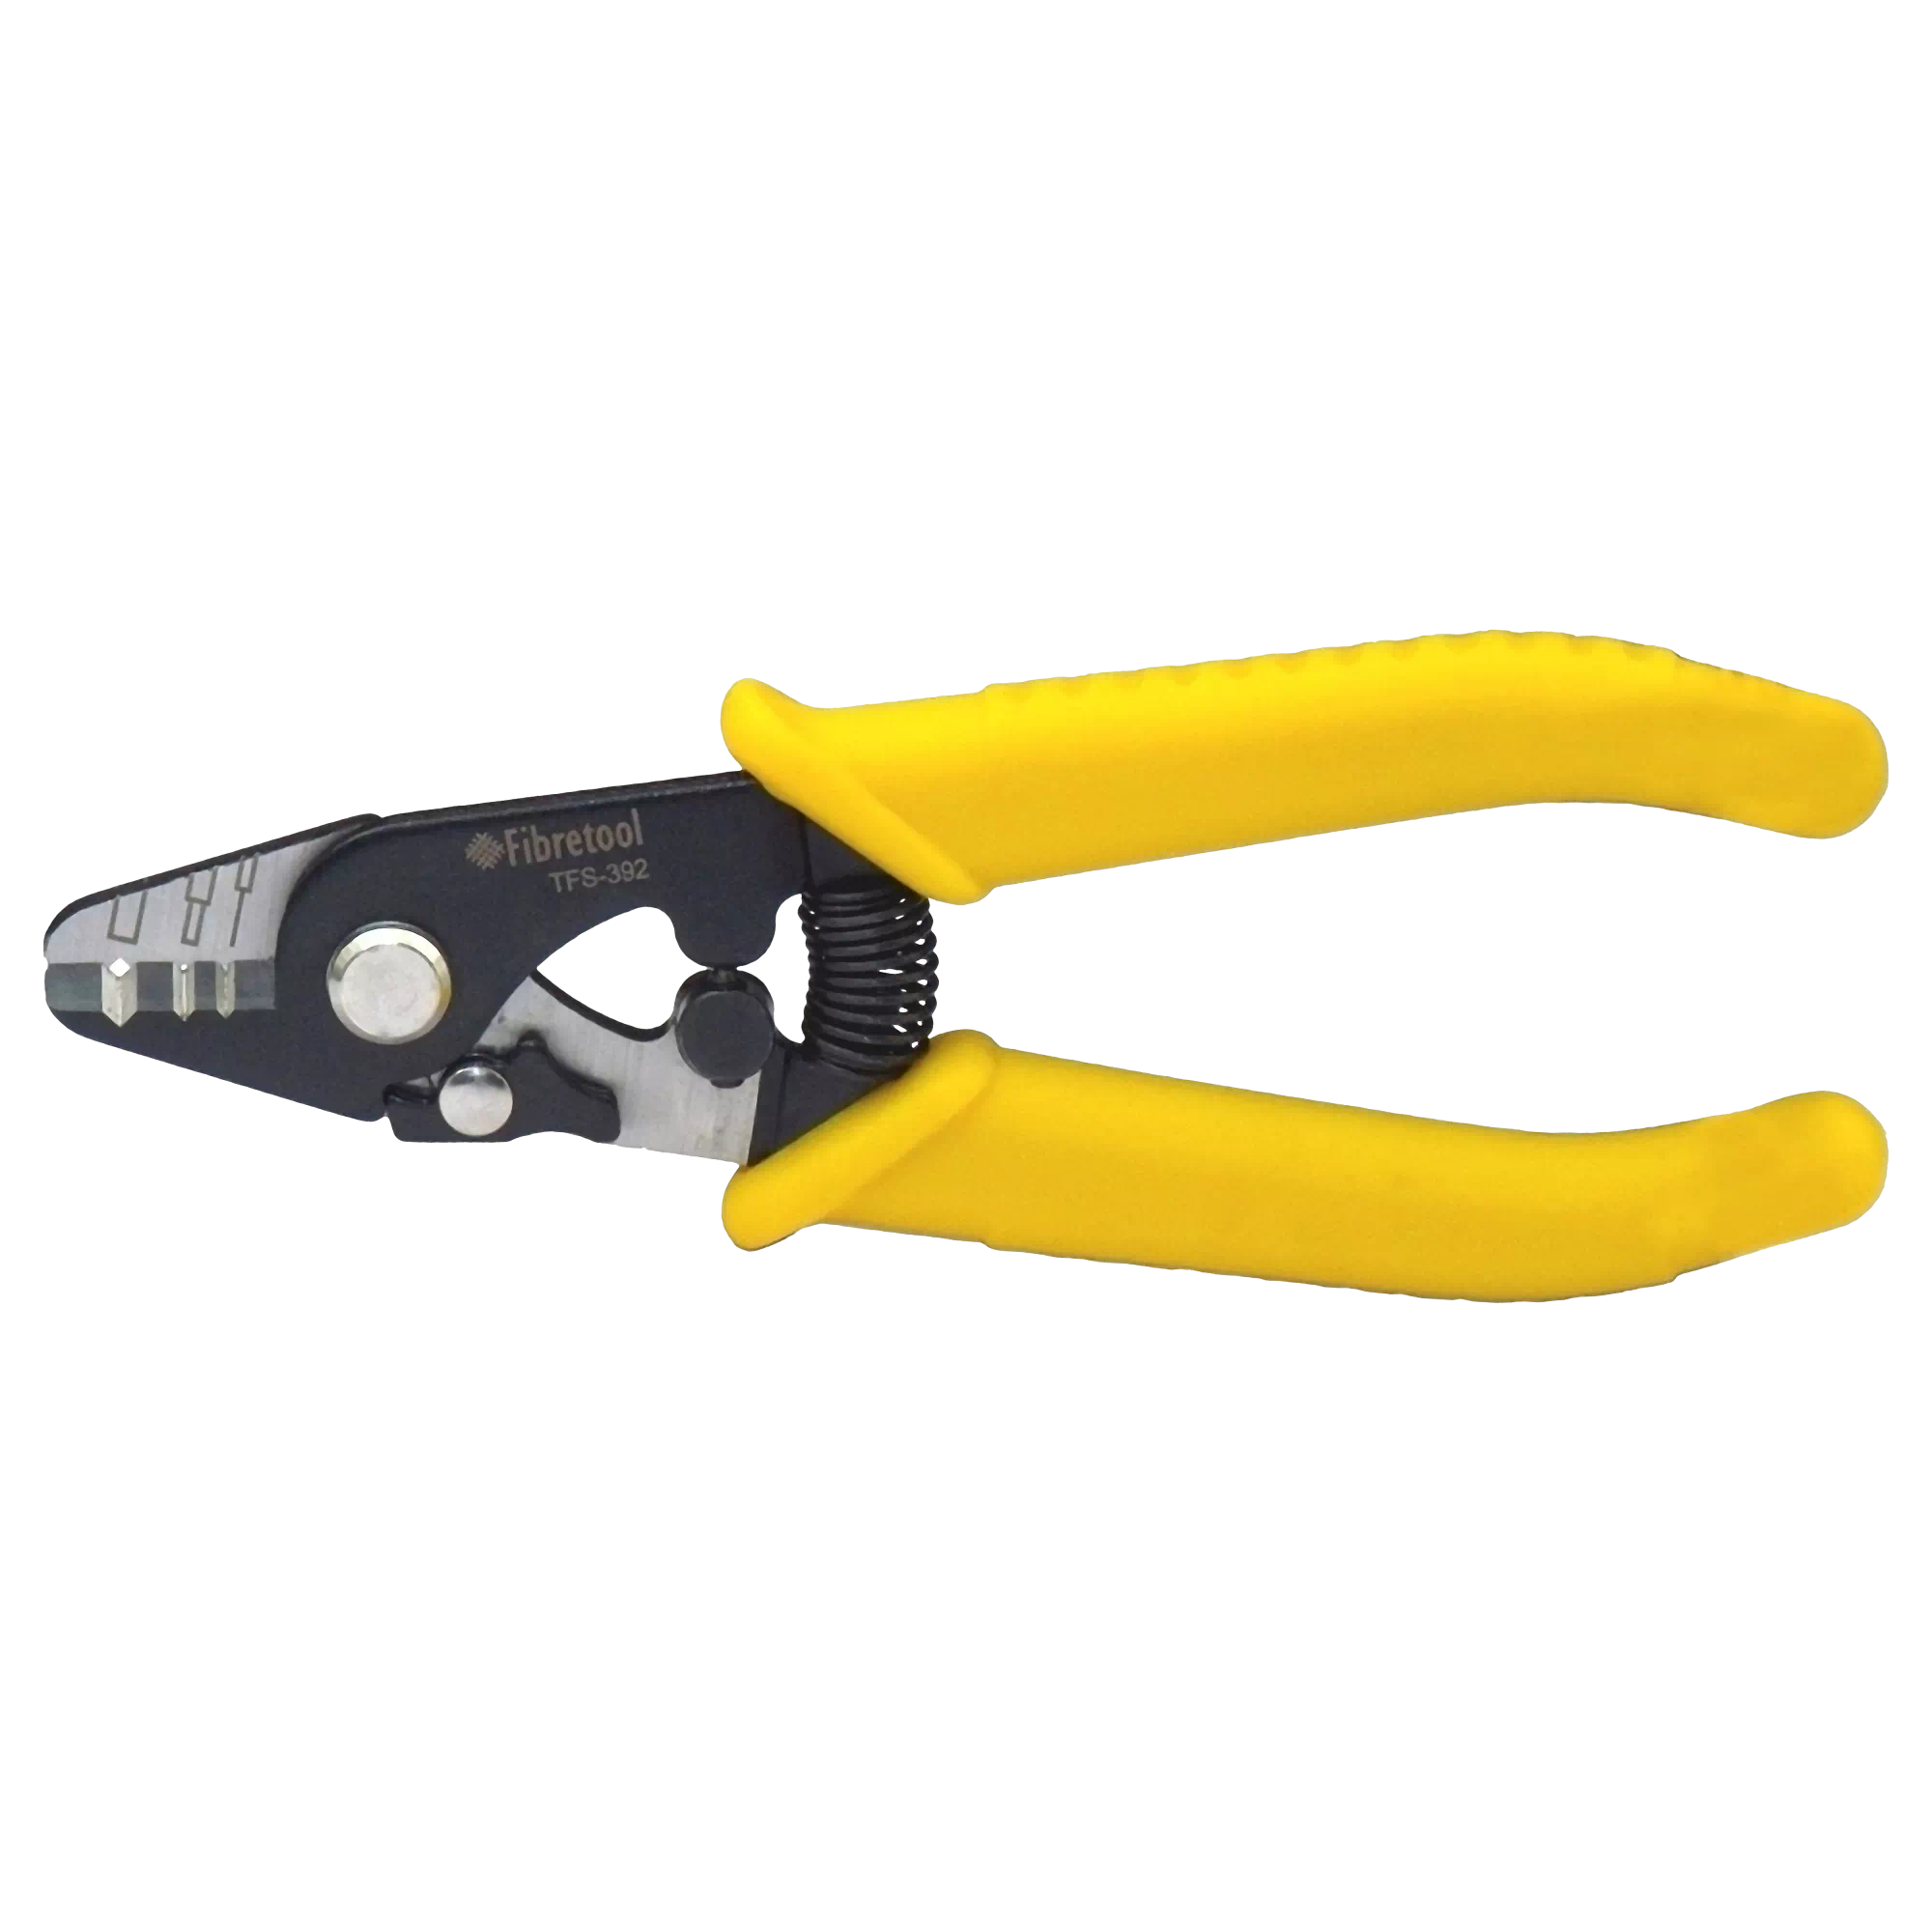 Ascend Tools FO3S-835 Three Hole Fiber Optic Stripper for Cable Splicing,  Cable Preparation, Stripping Jacket, Buffer and Cladding from Fiber Core